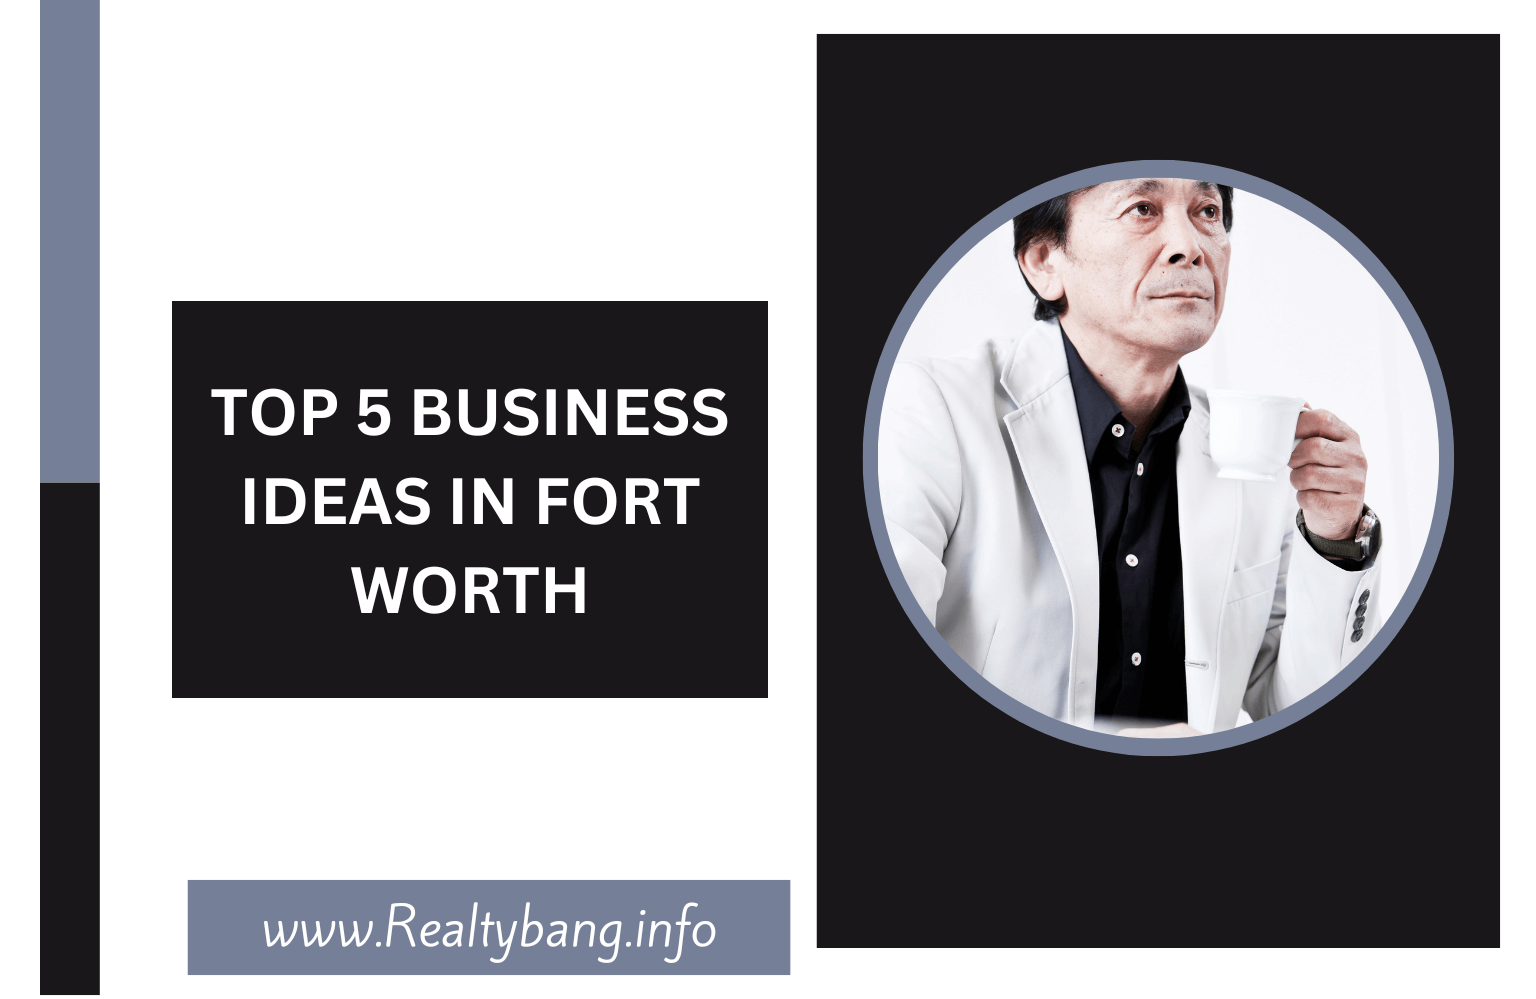 TOP 5 BUSINESS IDEAS IN FORT WORTH